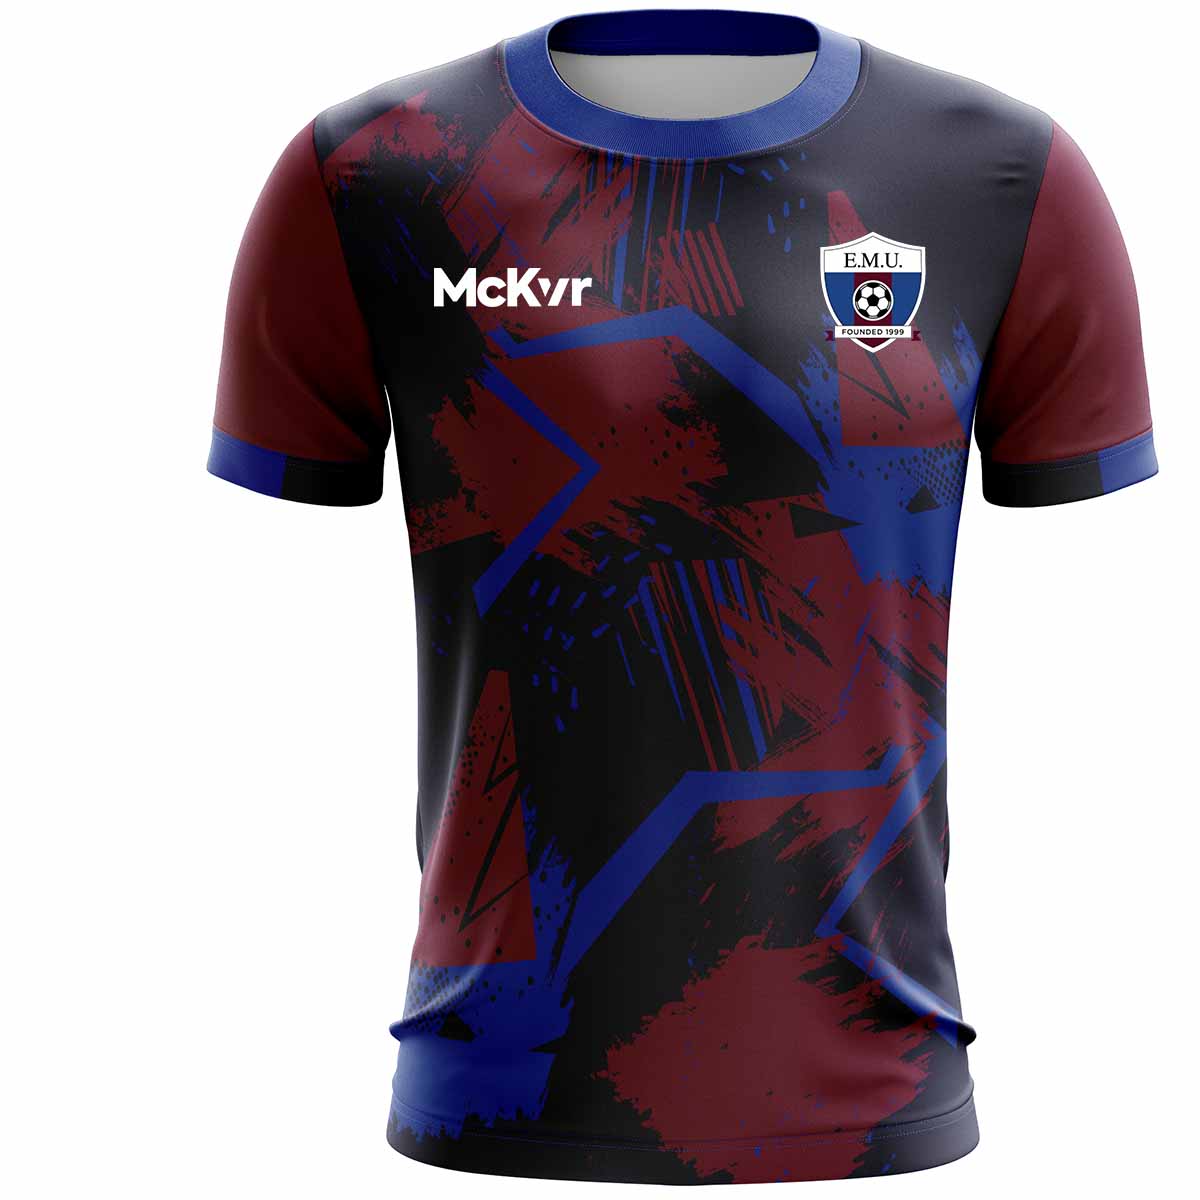 Mc Keever East Meath United FC Training Jersey - Womens - Navy/Maroon/Blue